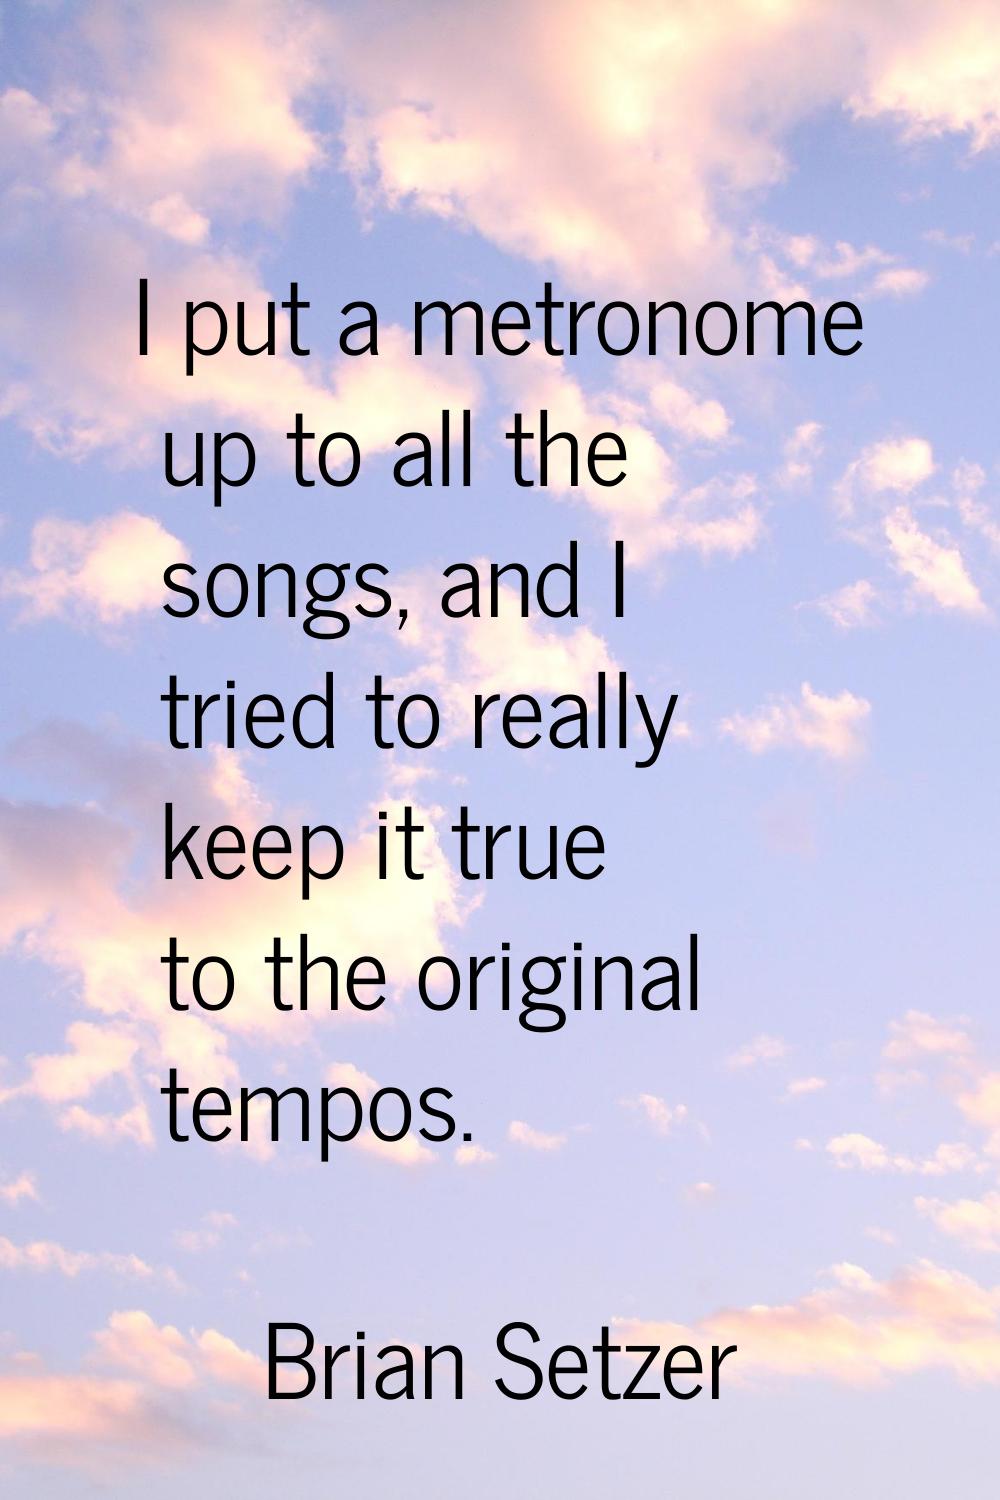 I put a metronome up to all the songs, and I tried to really keep it true to the original tempos.